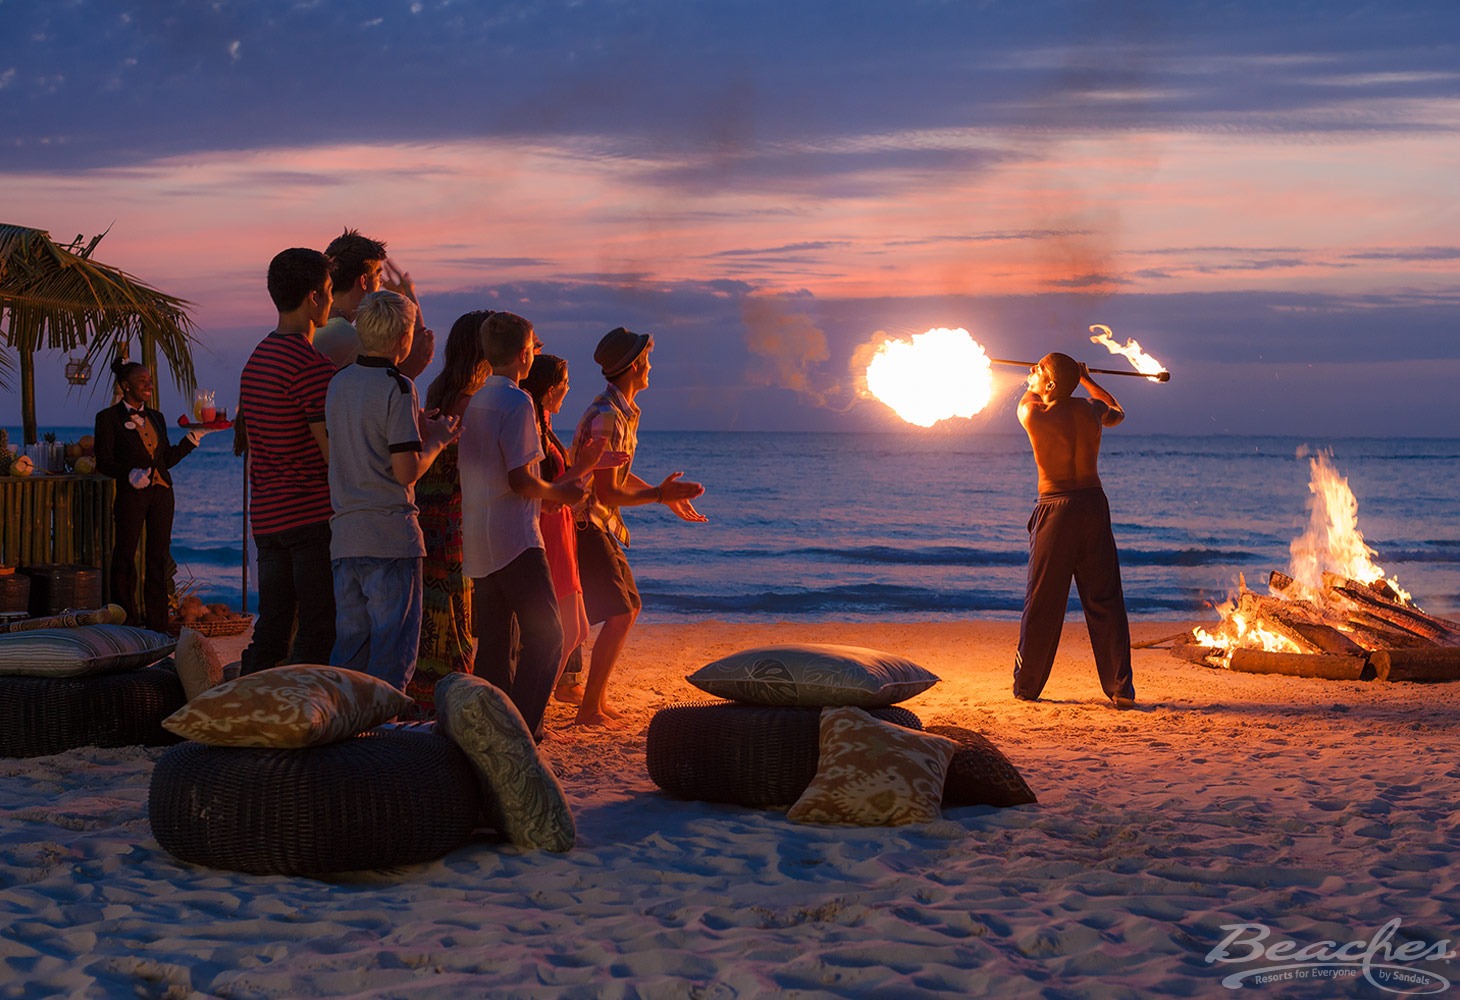 Entertainment for teens is included at all Beaches resorts